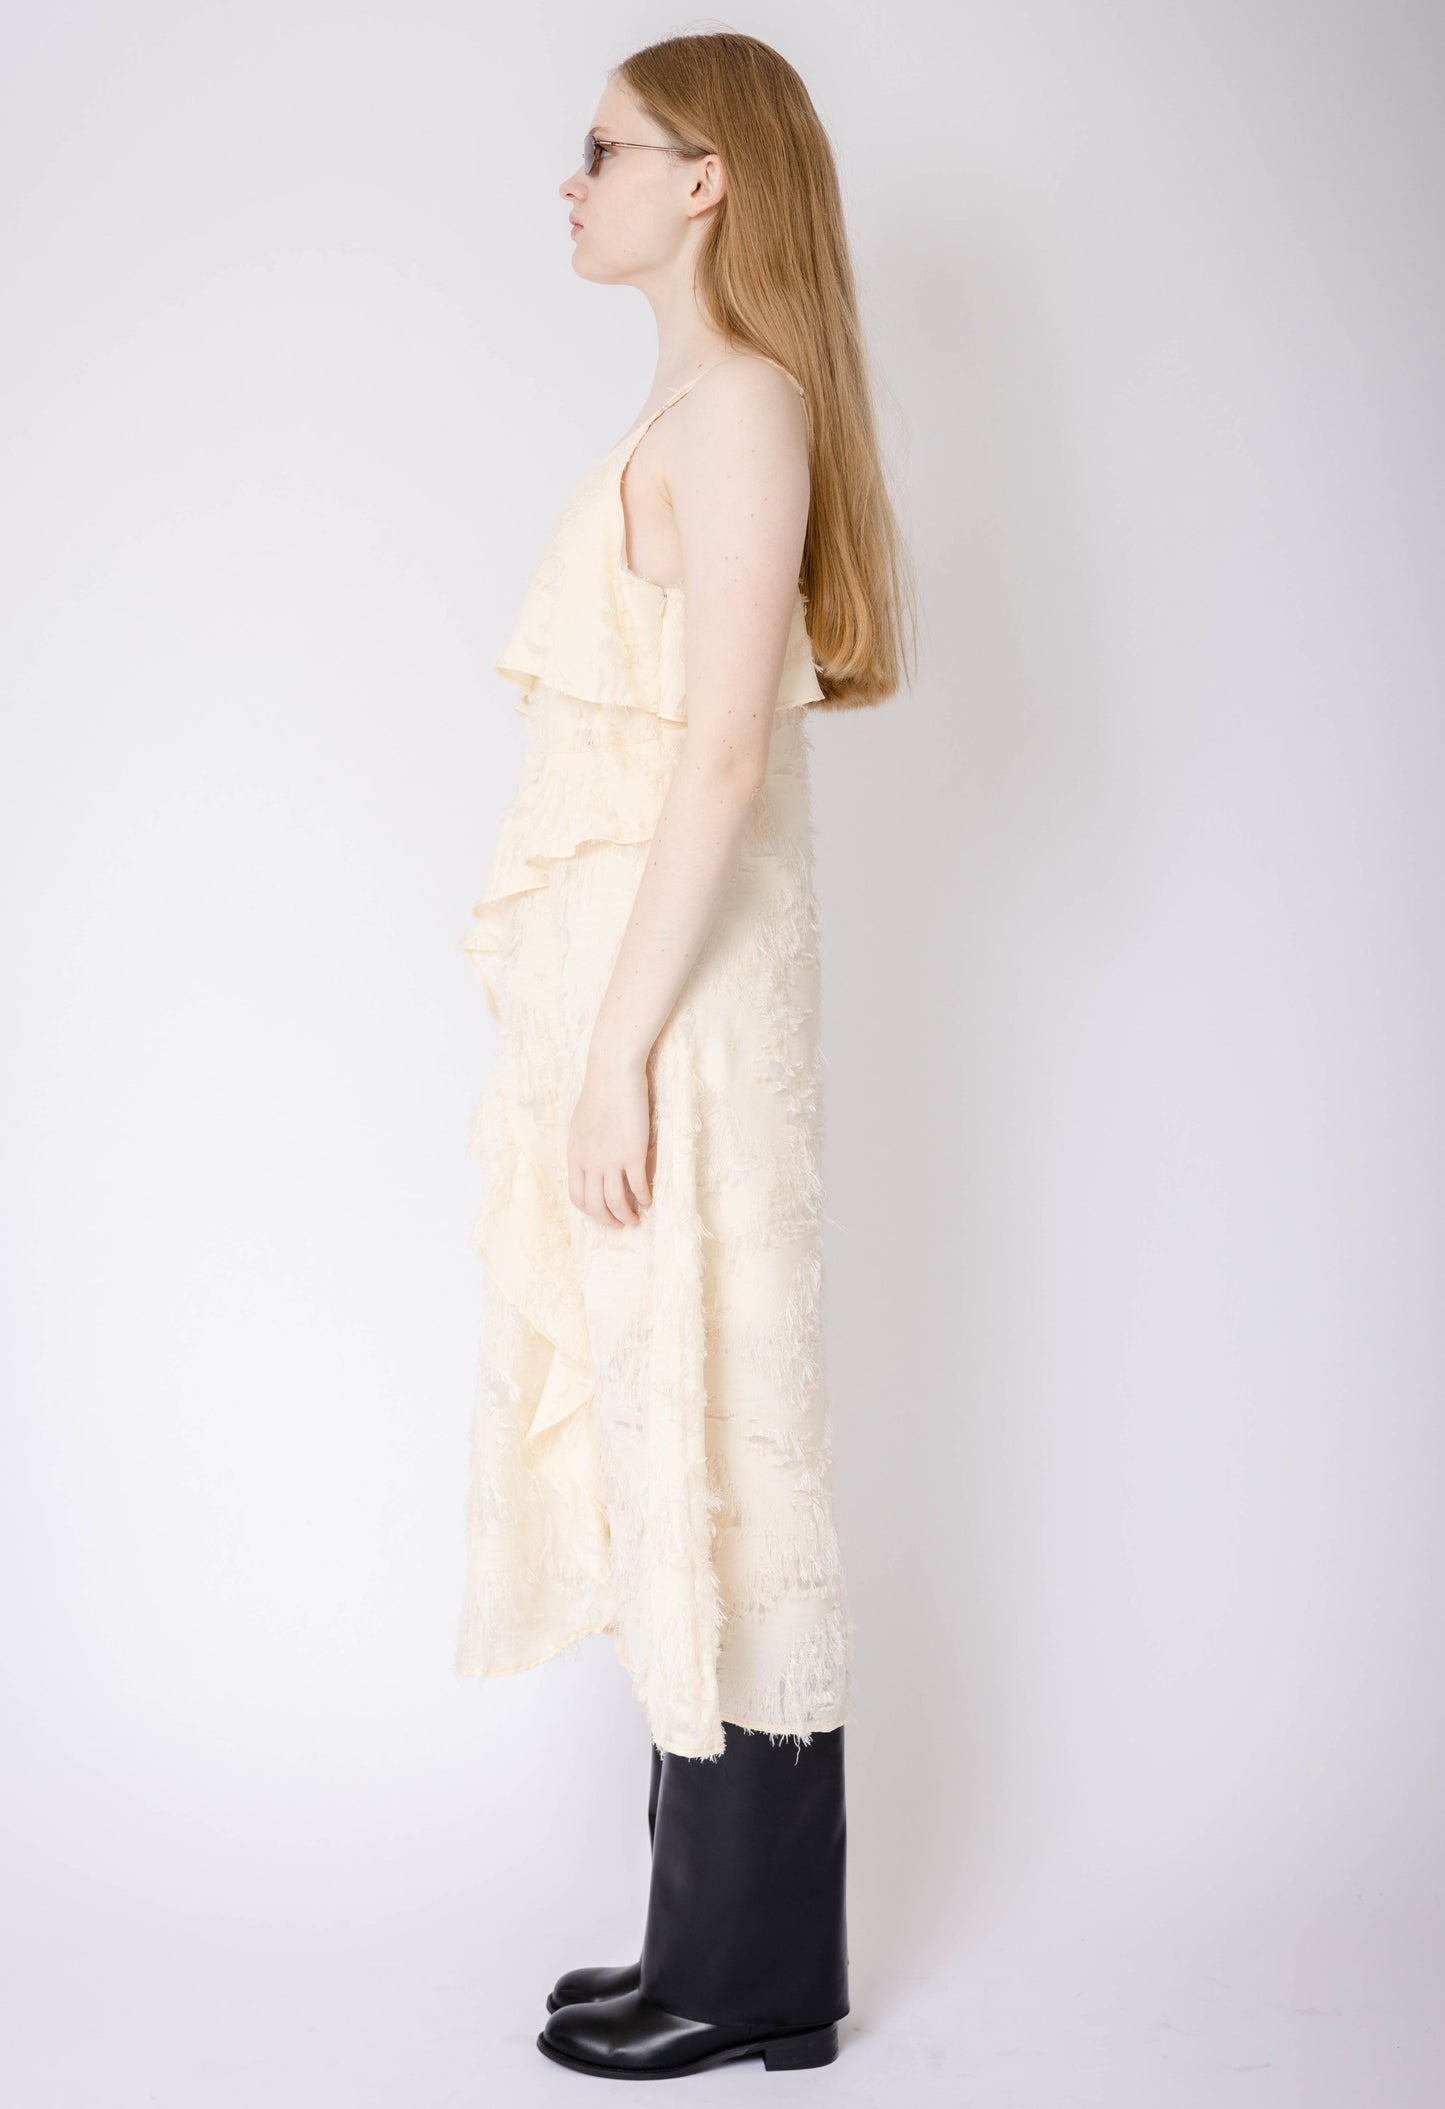 Elvina Dress in Pale Yellow